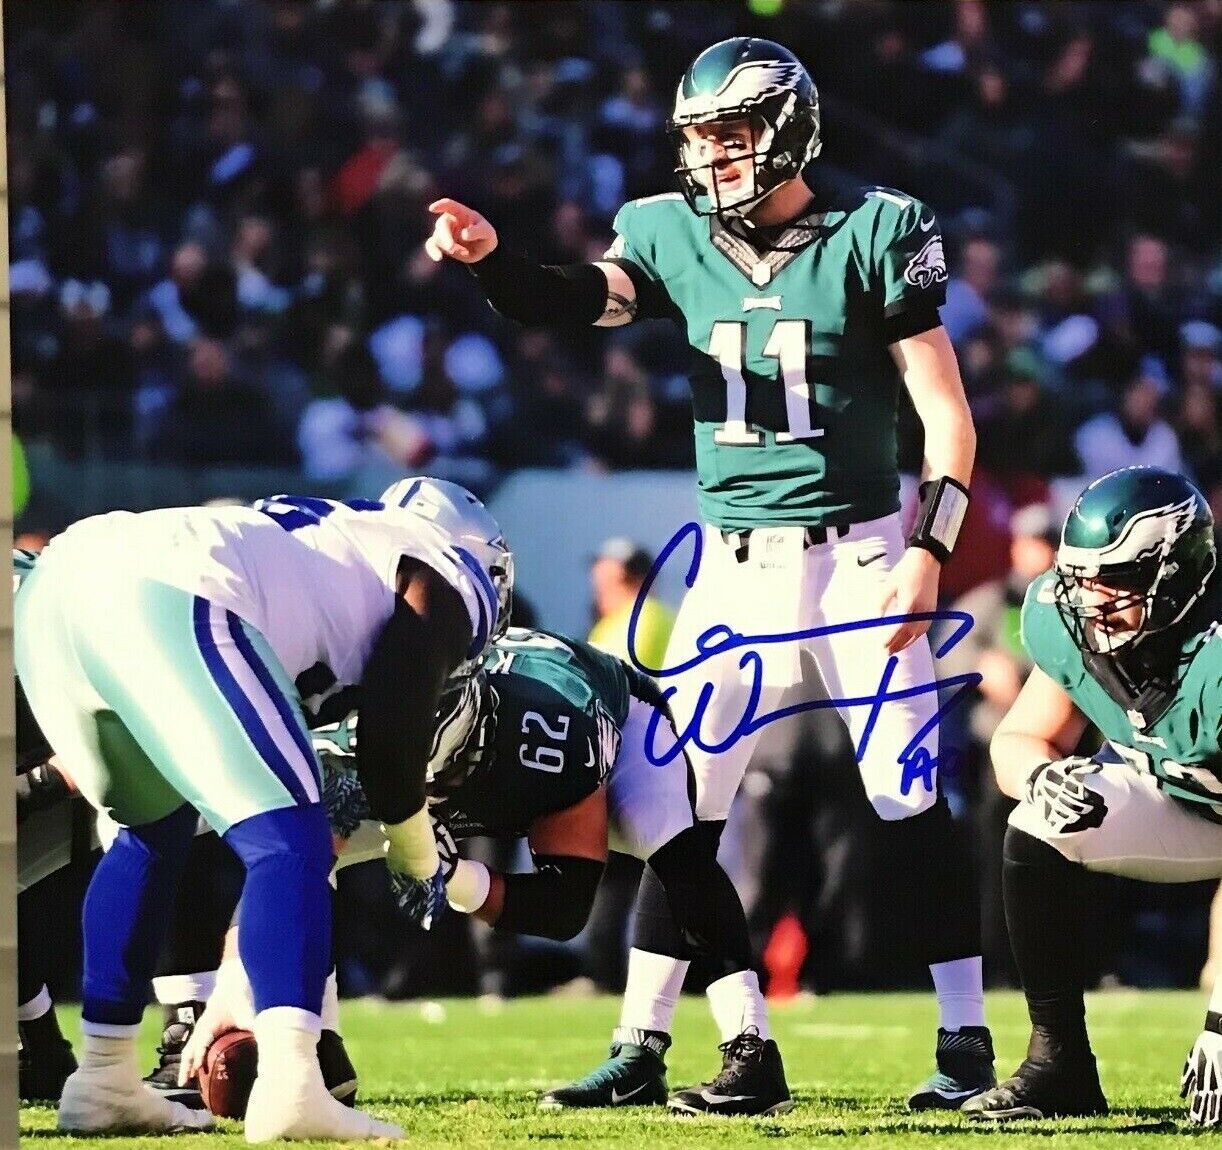 Carson Wentz Autographed Signed 8x10 Photo Poster painting ( Eagles ) REPRINT ,